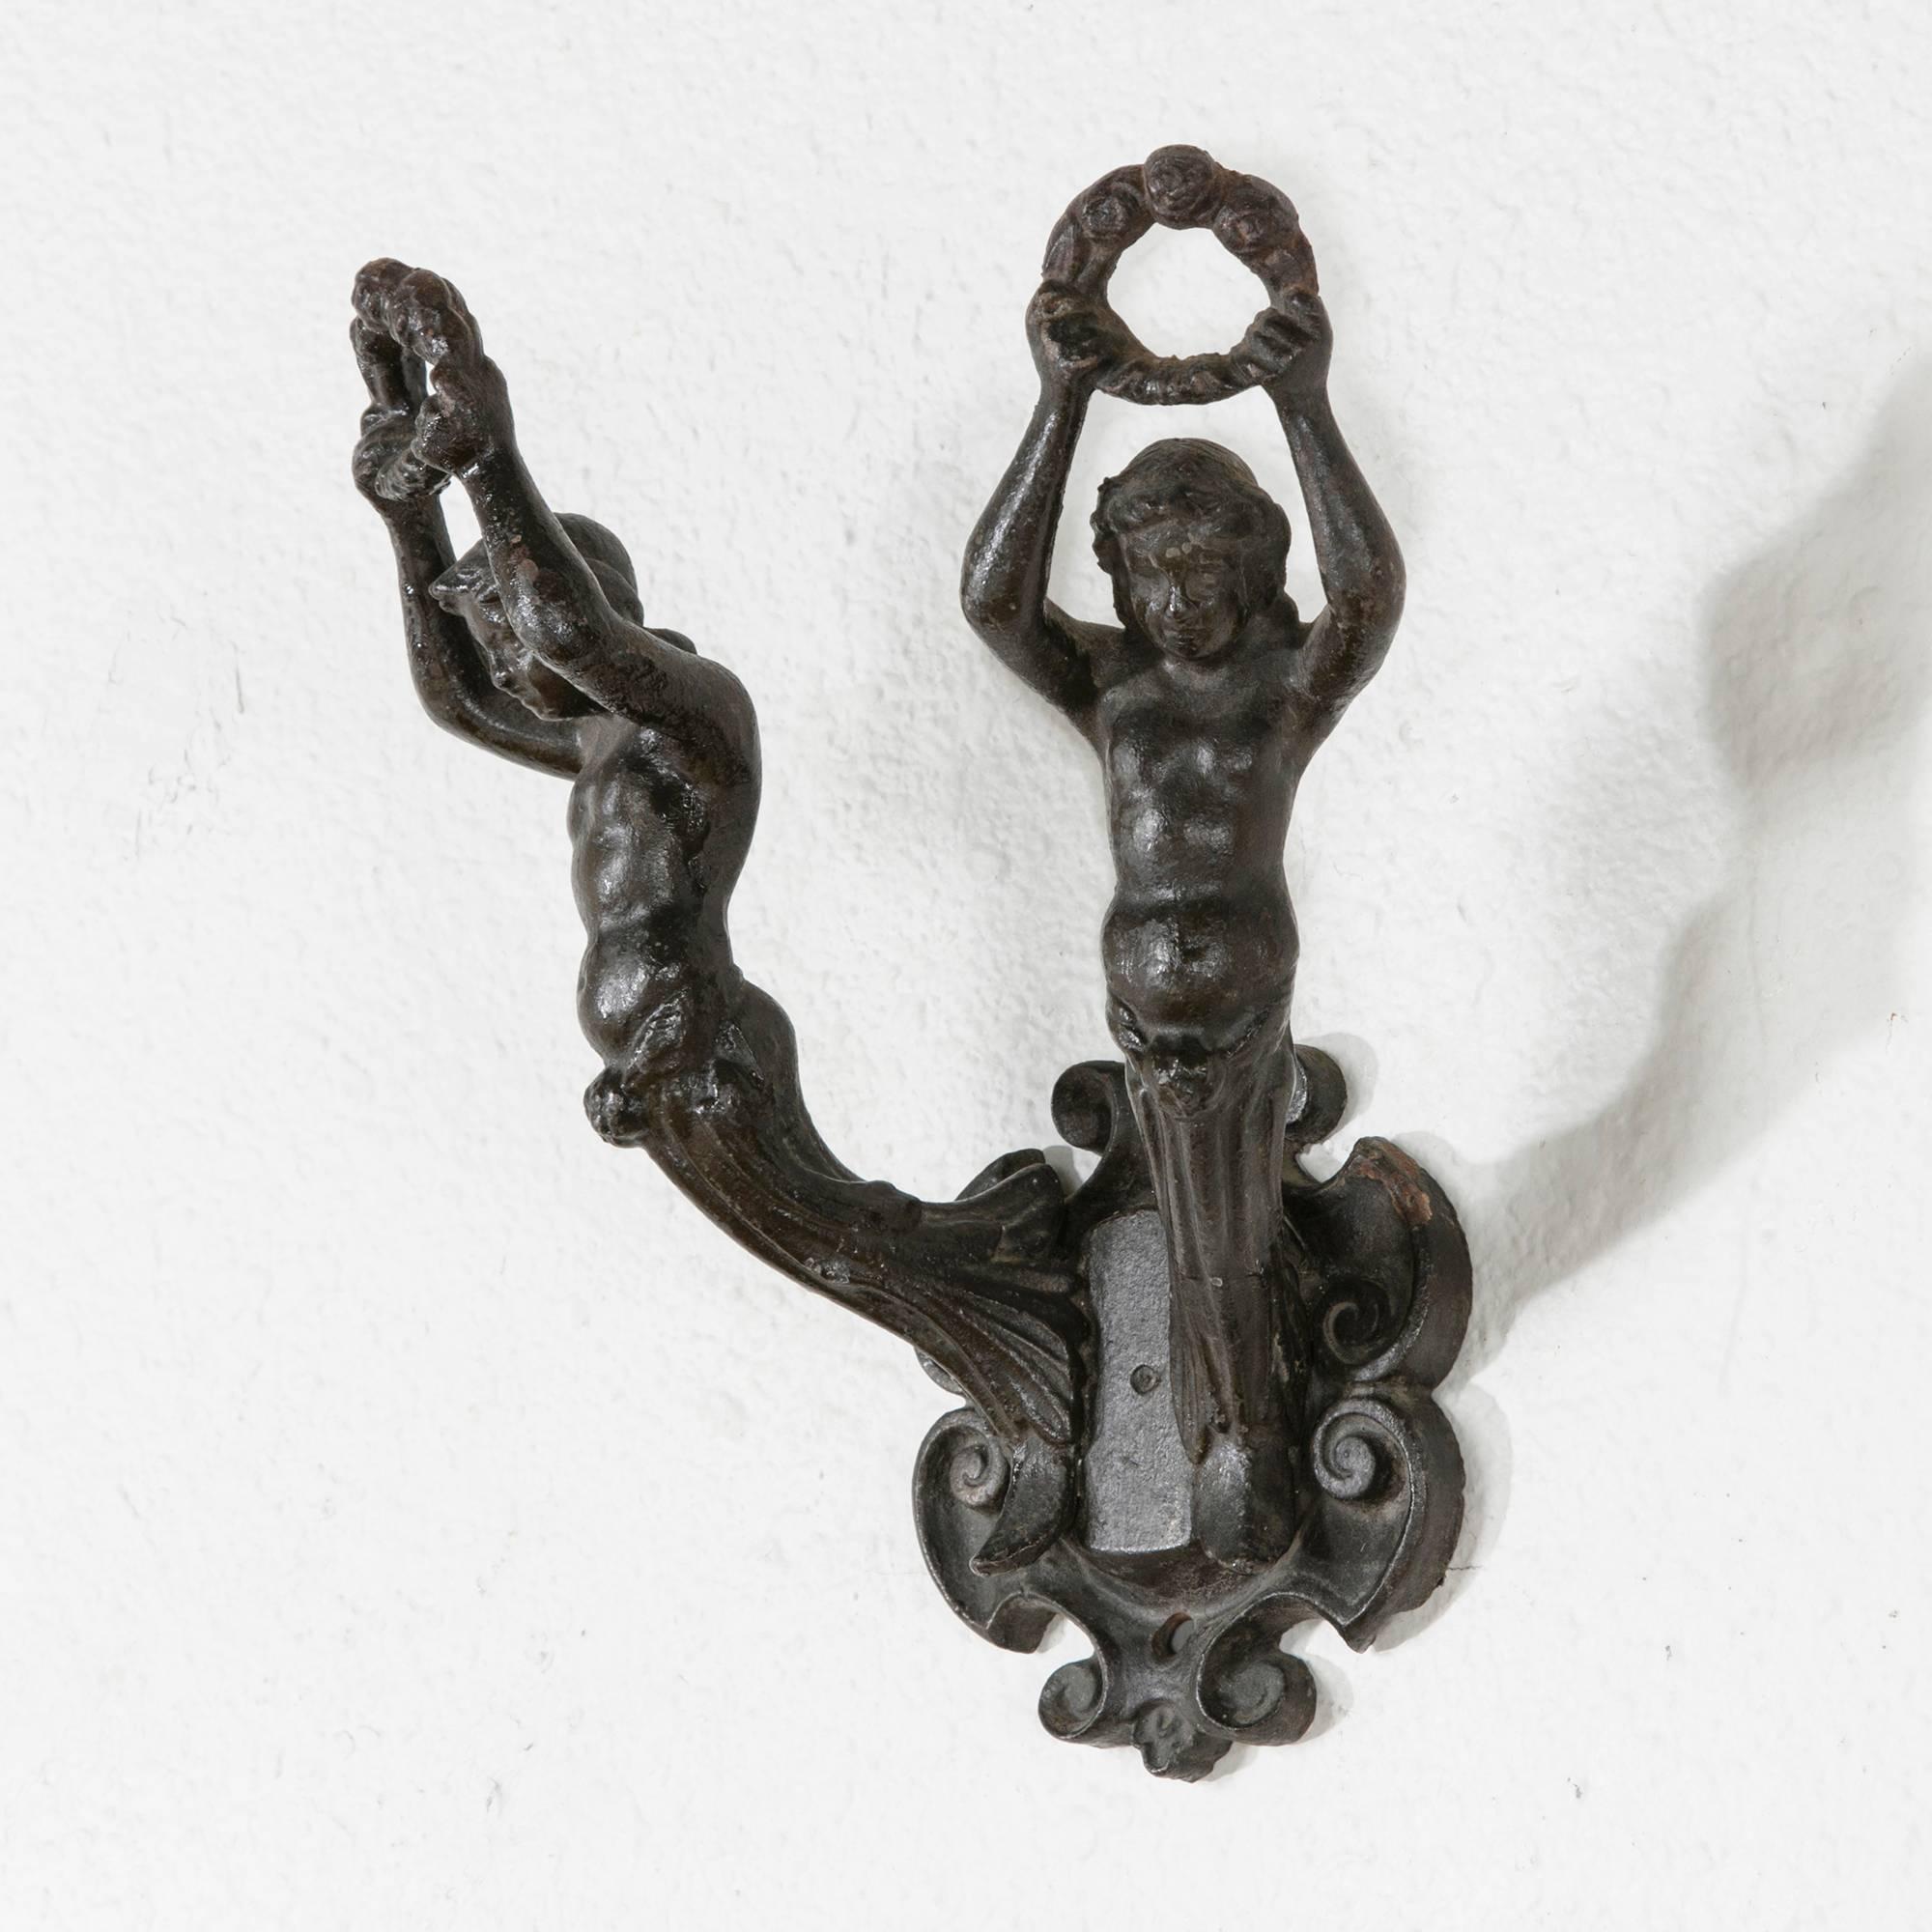 The French Art Nouveau movement brought sweeping changes to the decorative arts of the early 20th century. This cast iron hook of the period unites function and form in two heraldic figures with outstretched arms bearing laurel wreaths. Of a large